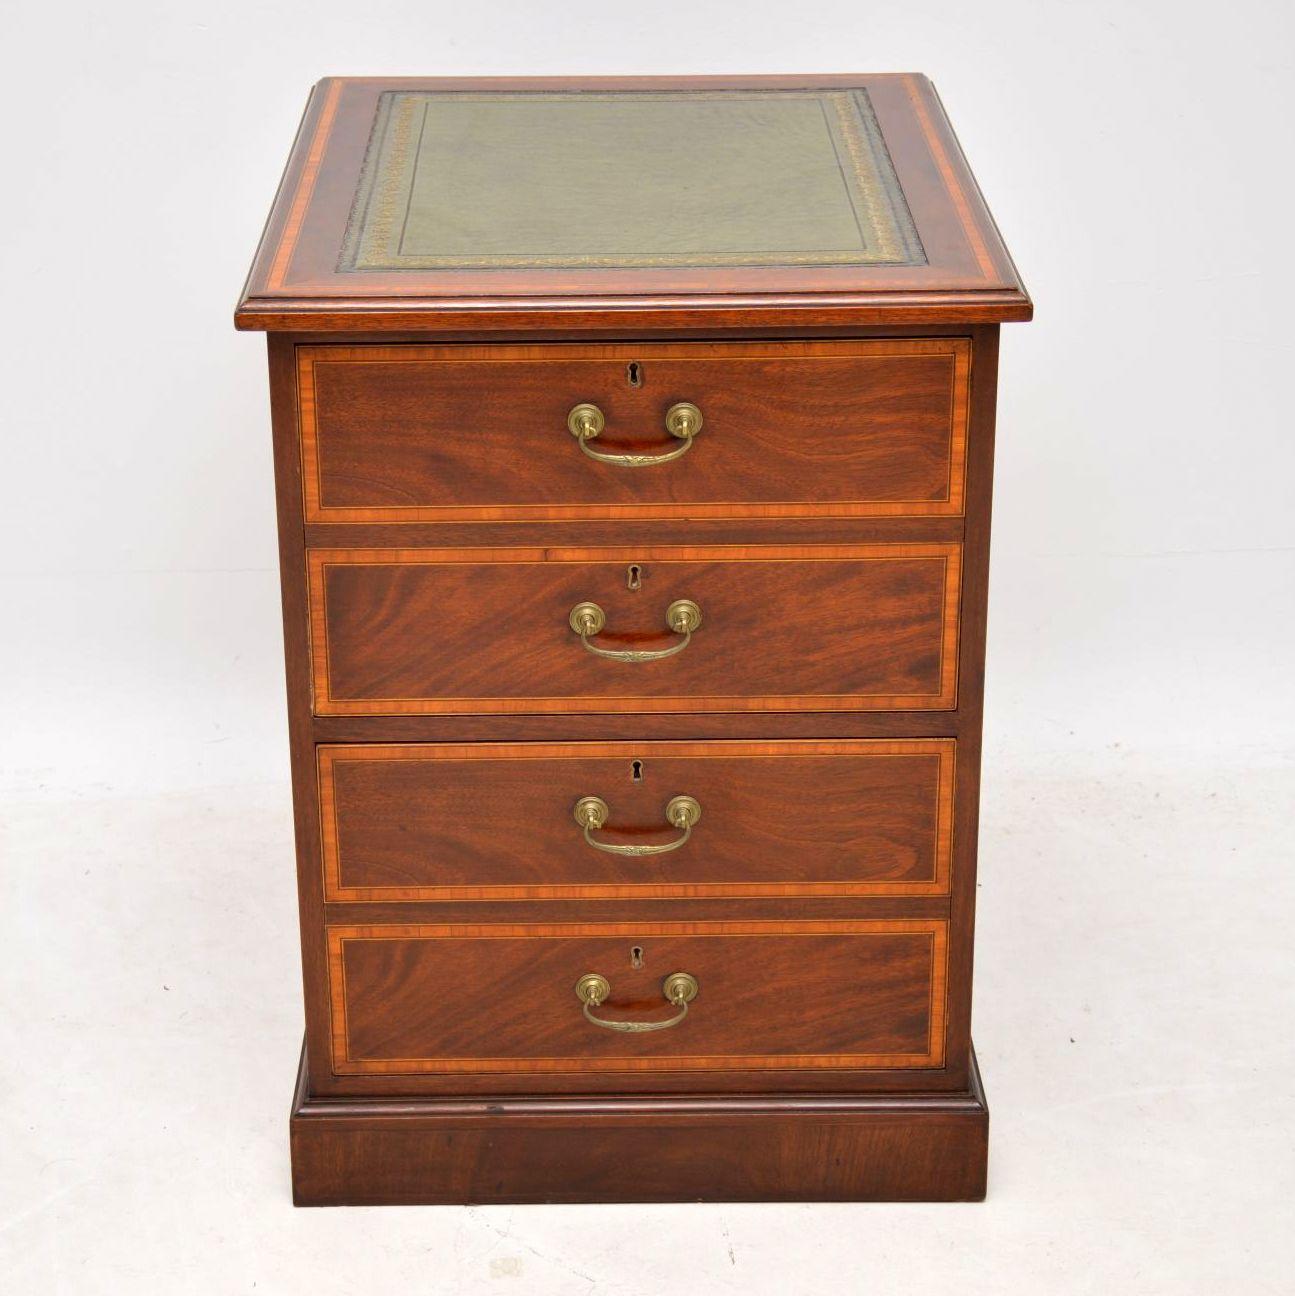 Antique Georgian style mahogany filing cabinet, with two deep filing drawers that look like four drawers when closed. This filing chest is in excellent condition & is about 40-50 years old. It has a tooled leather insert on the top, four brass